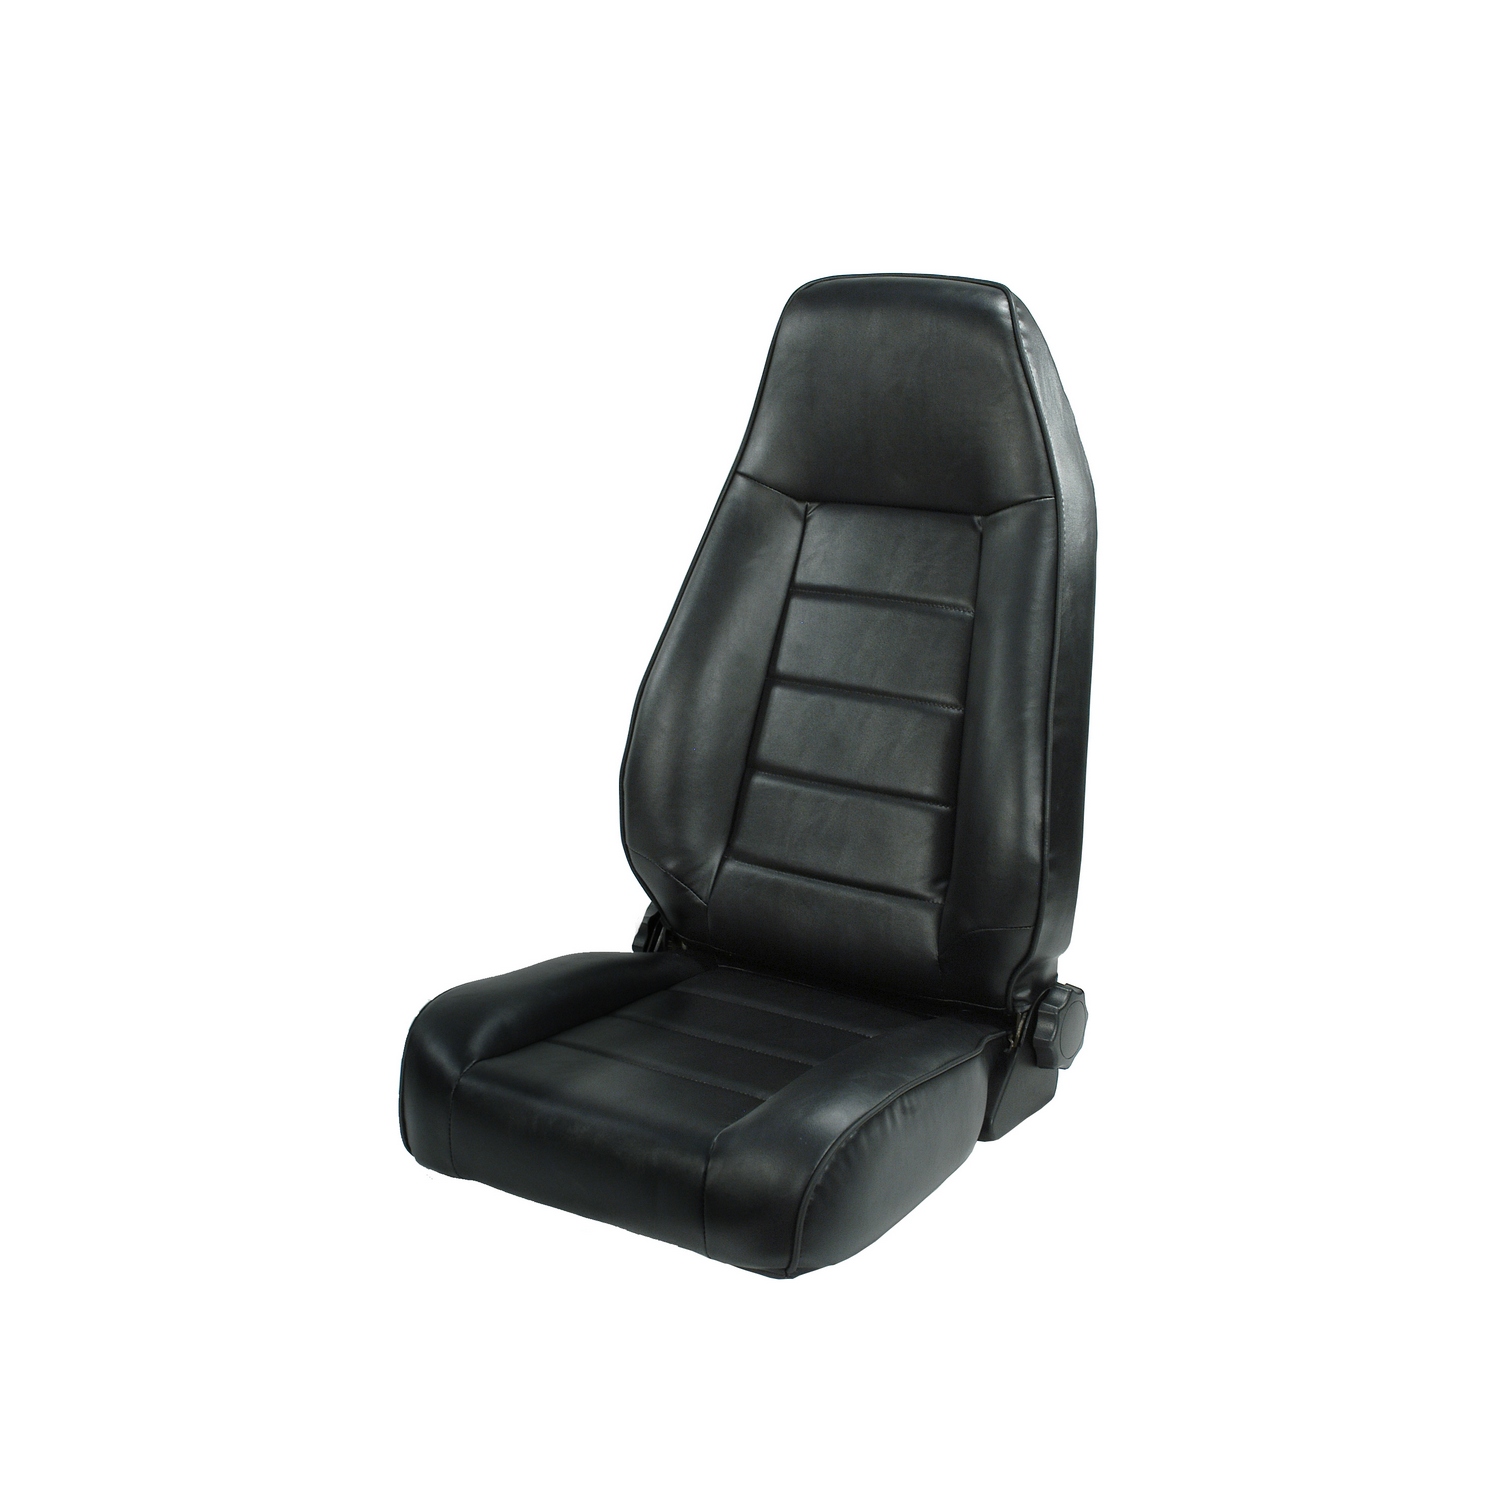 Rugged Ridge Front Seat Factory Style Replacement with Recliner Black |  Best Prices & Reviews at Morris 4x4